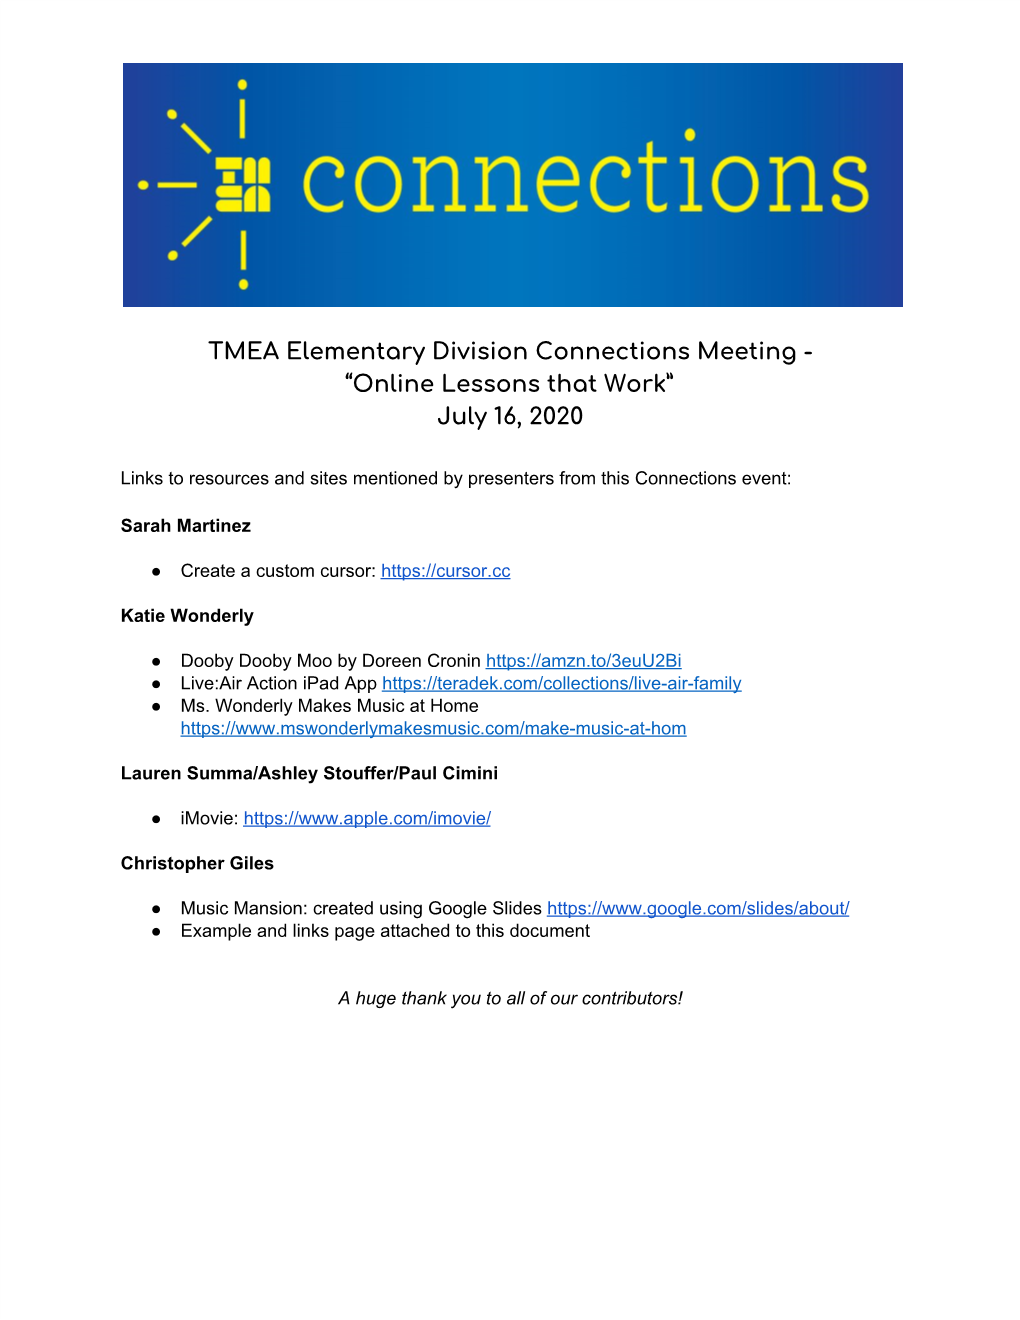 TMEA Elementary Division Connections Meeting - “Online Lessons That Work” July 16, 2020